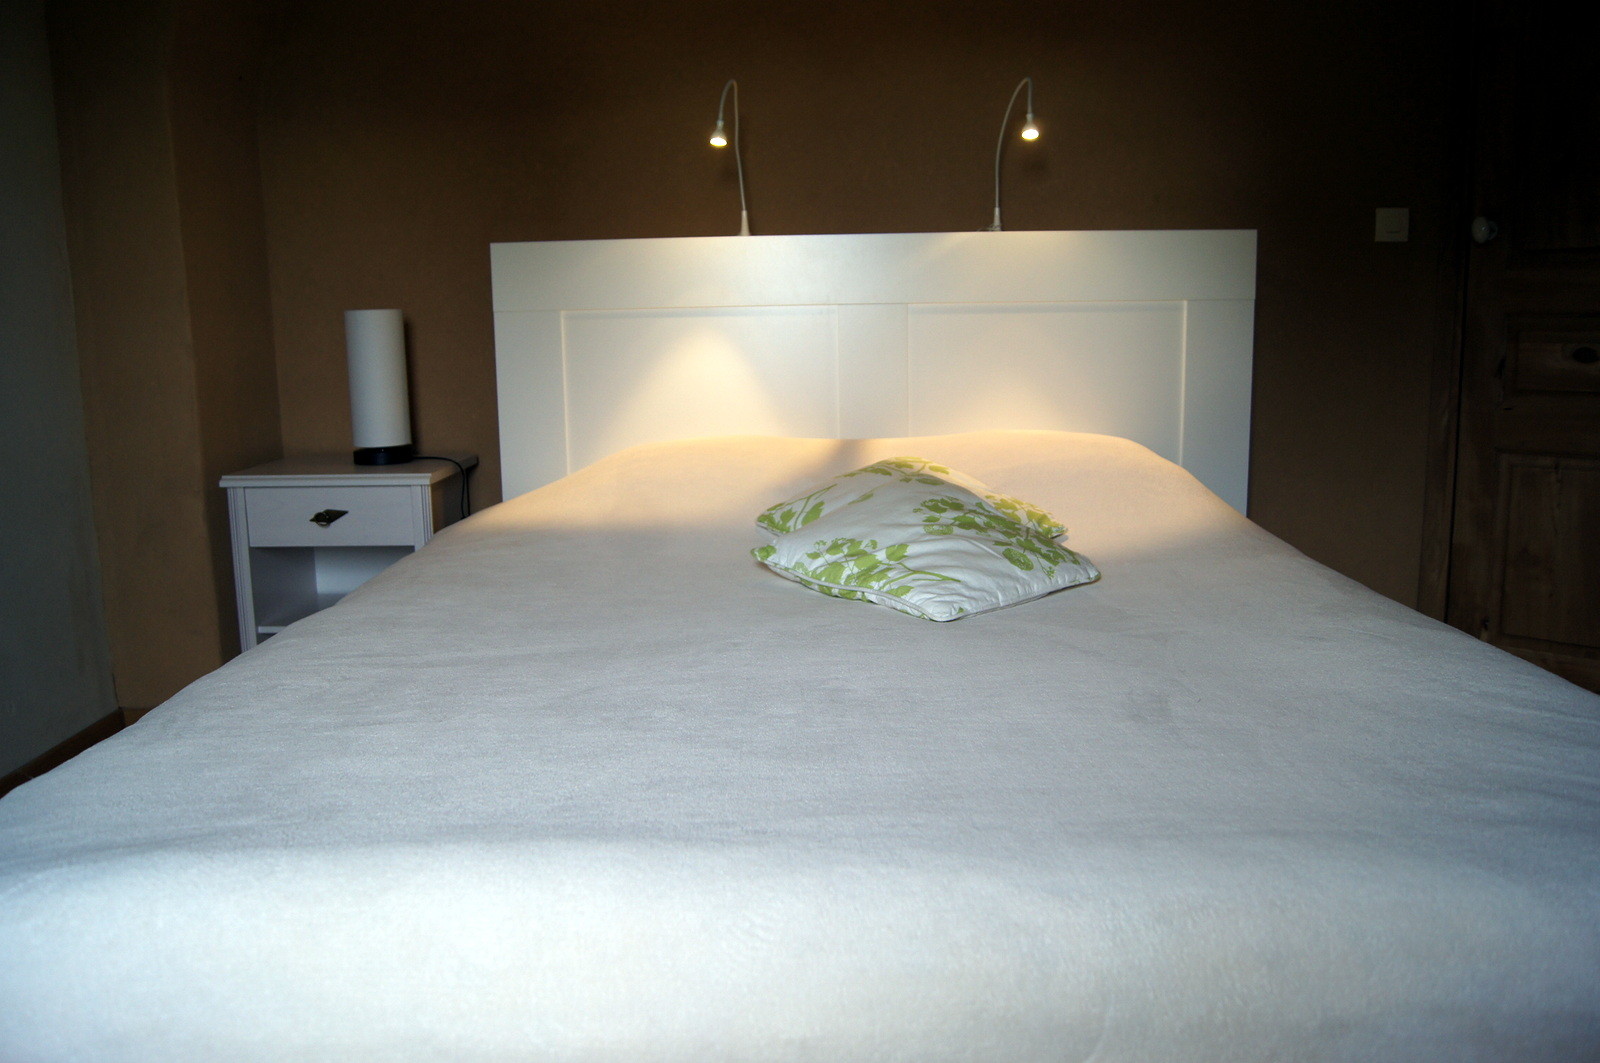 Chambre double * Double room * Doppelzimmer * Tweepersoonskamer * Camera doppia